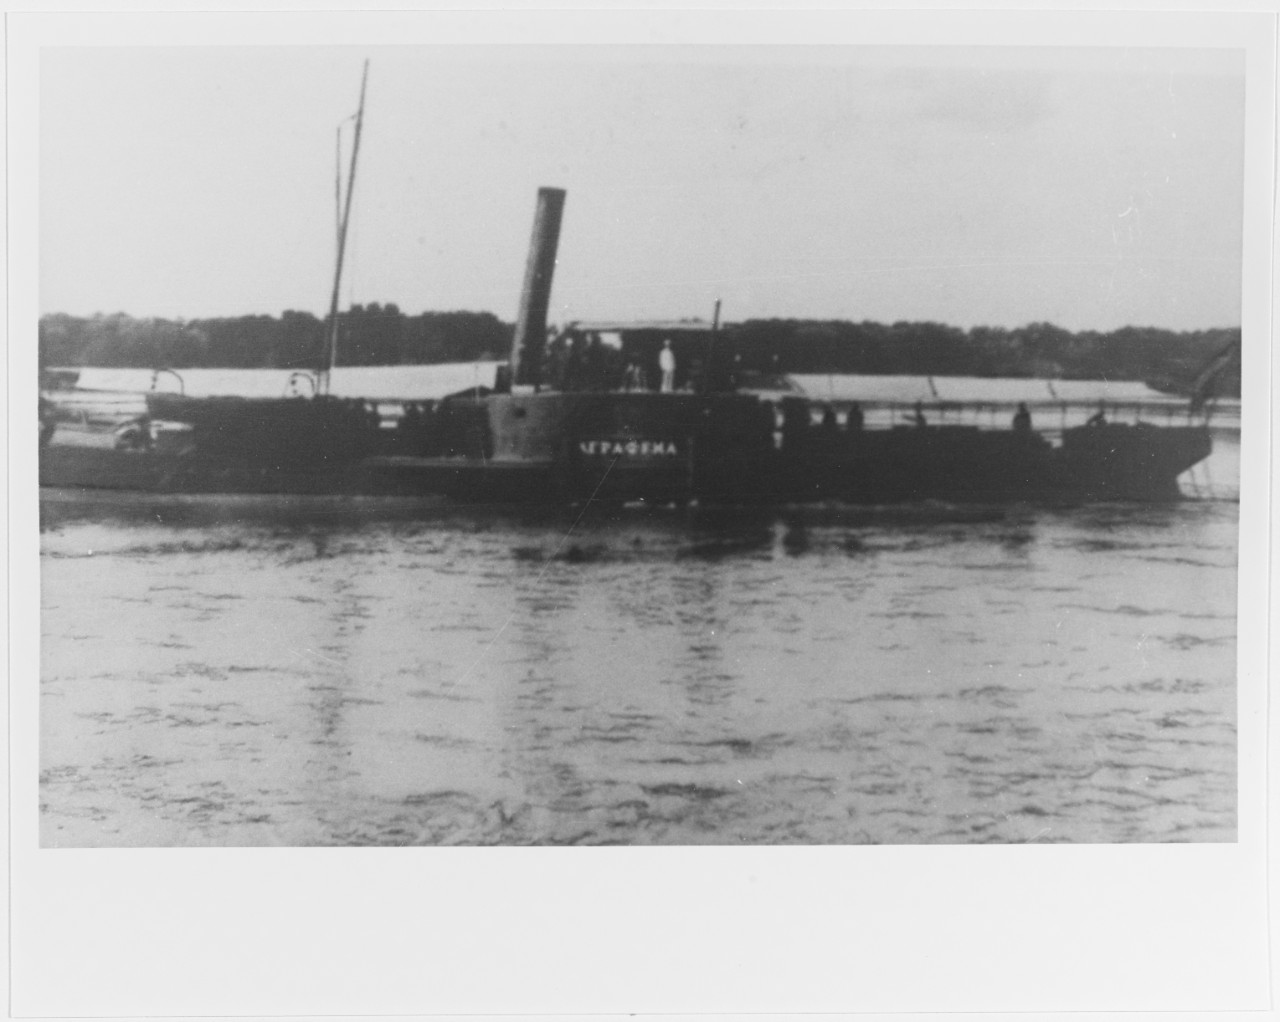 AGRAFENA (Russian merchant paddle steamer, about 1880)